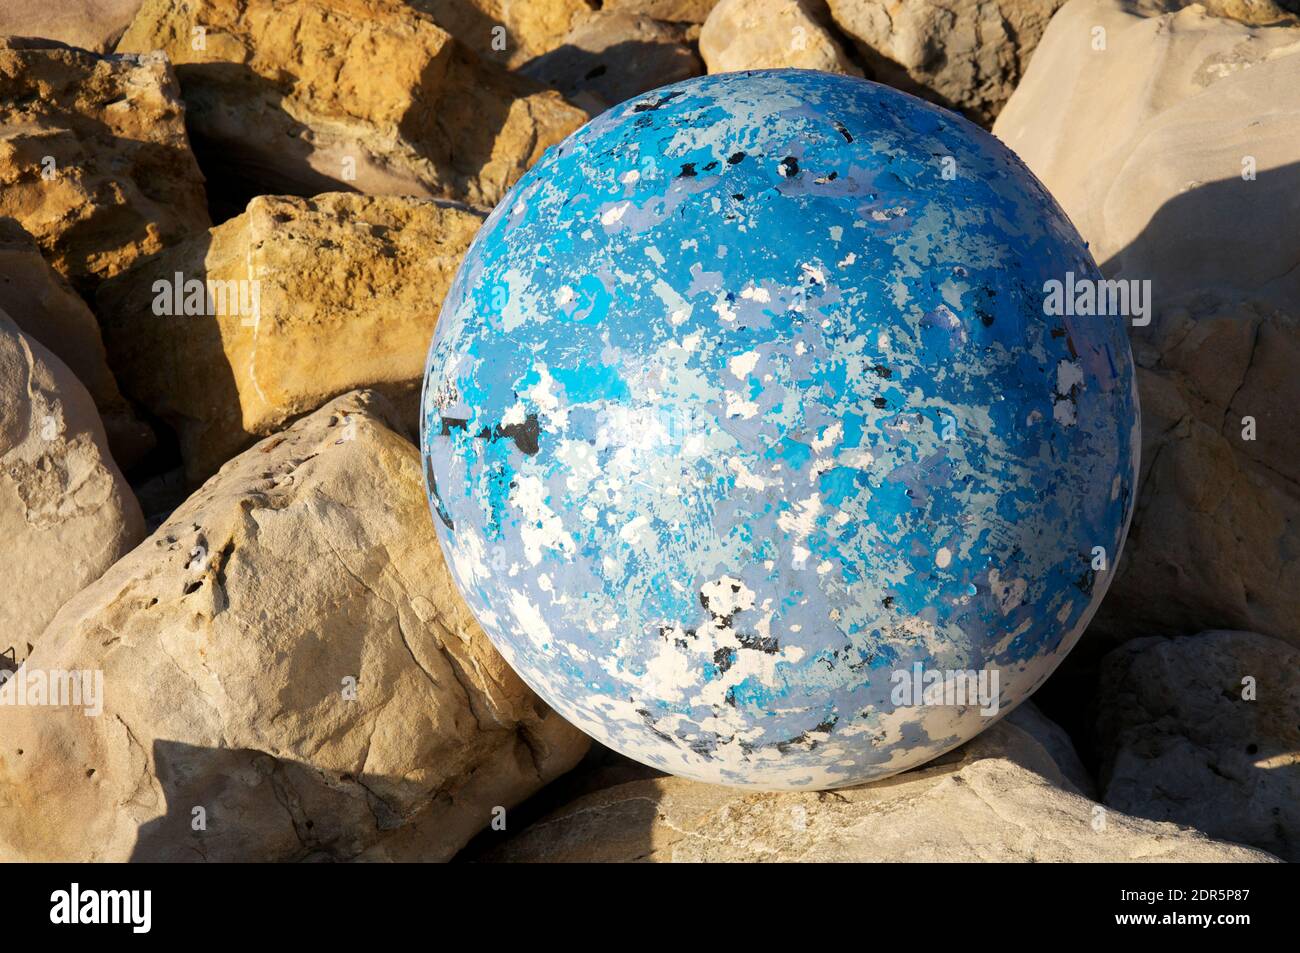 Surreal blue sphere against a rocky background. Flotsam and jetsam, a worn spherical Buoy textured with flaking paint, washed up on a beach in Dorset. Stock Photo